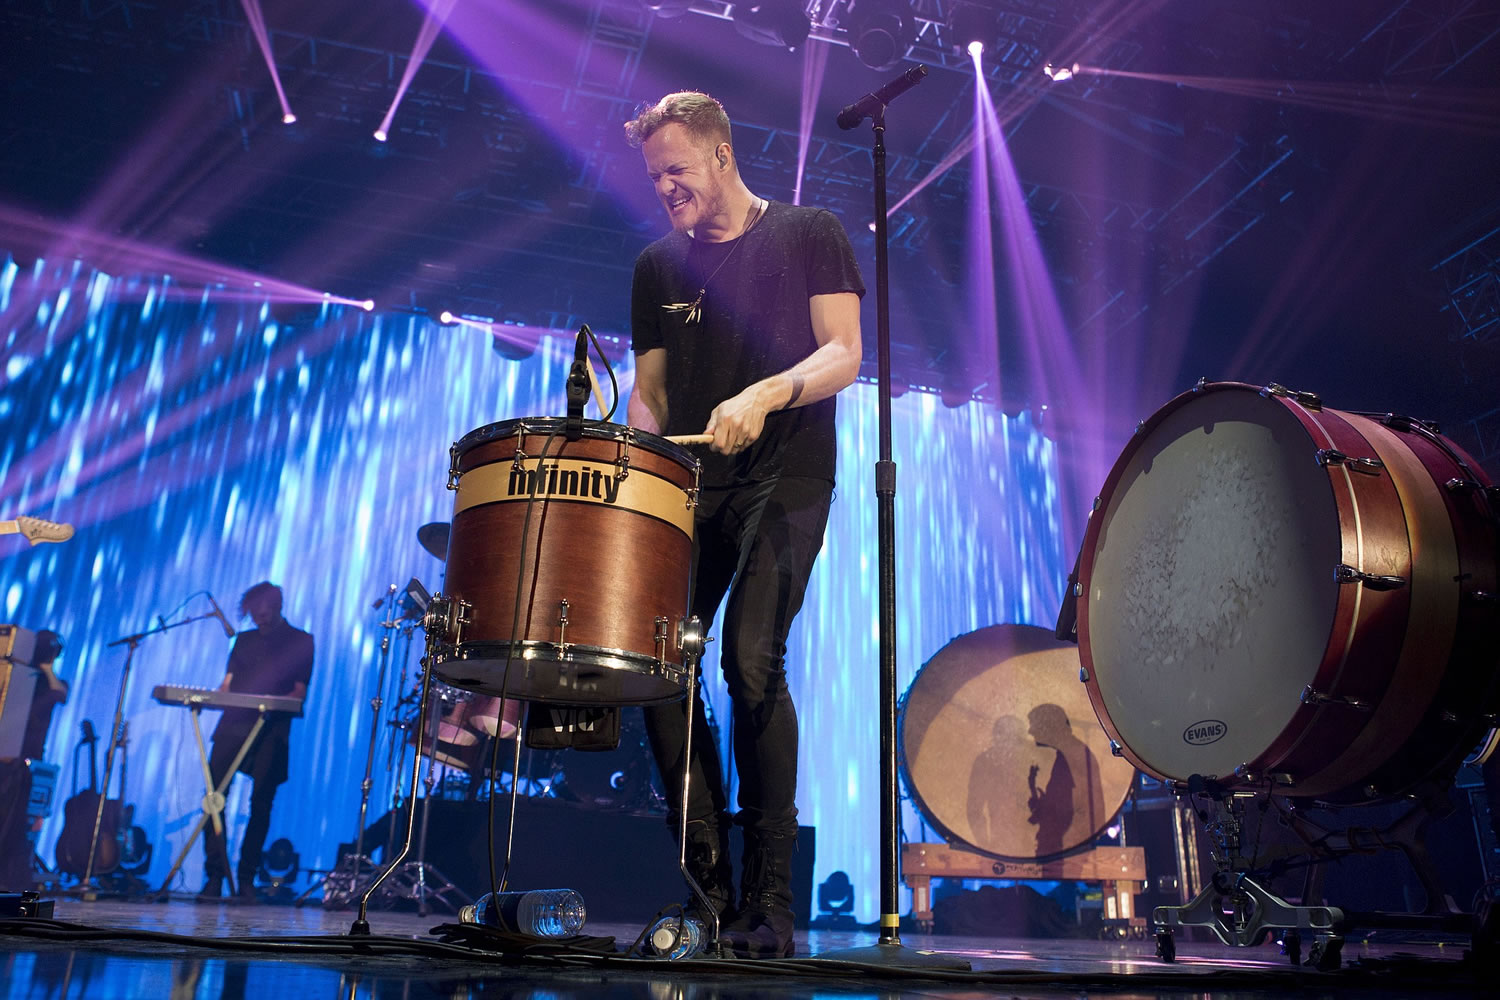 FILE - In this Jan. 31, 2014 file photo, Dan Reynolds of Imagine Dragons performs at The Bud LIght Hotel, in New York. Imagine Dragons set a record last week on the Billboard Hot 100 with the anthemic rock jam, ?Radioactive,? which has spent 77 weeks - and counting - on the chart.